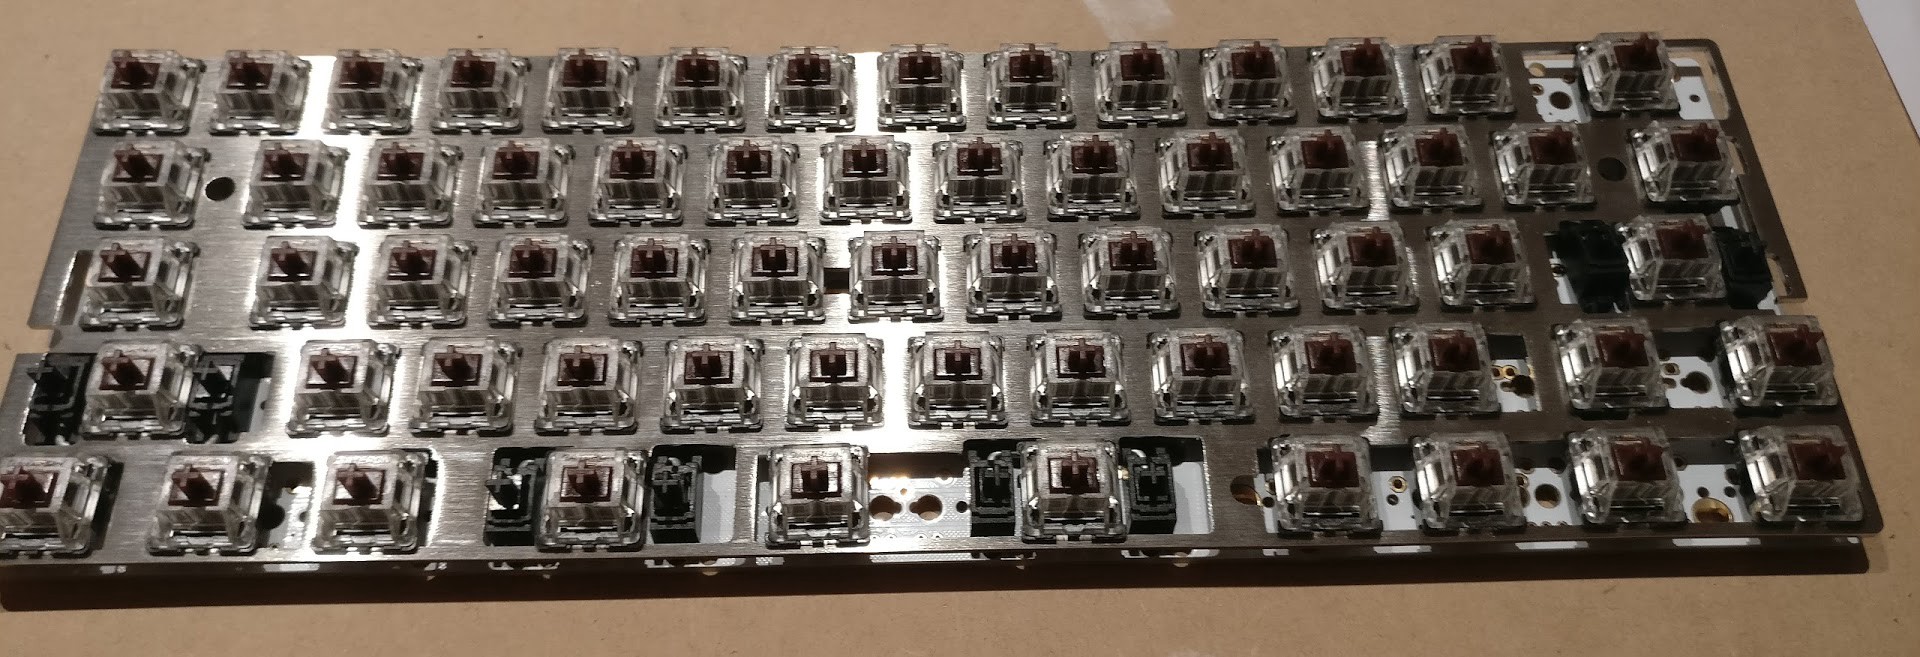 All the switches soldered in